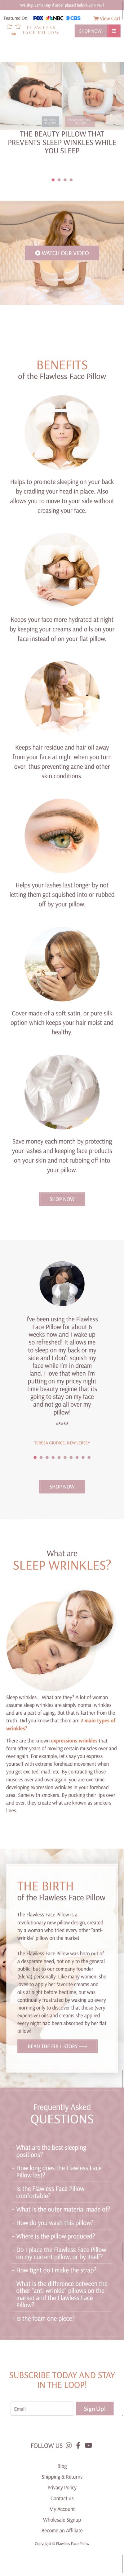 Mobile web design of Flawless Face Pillow